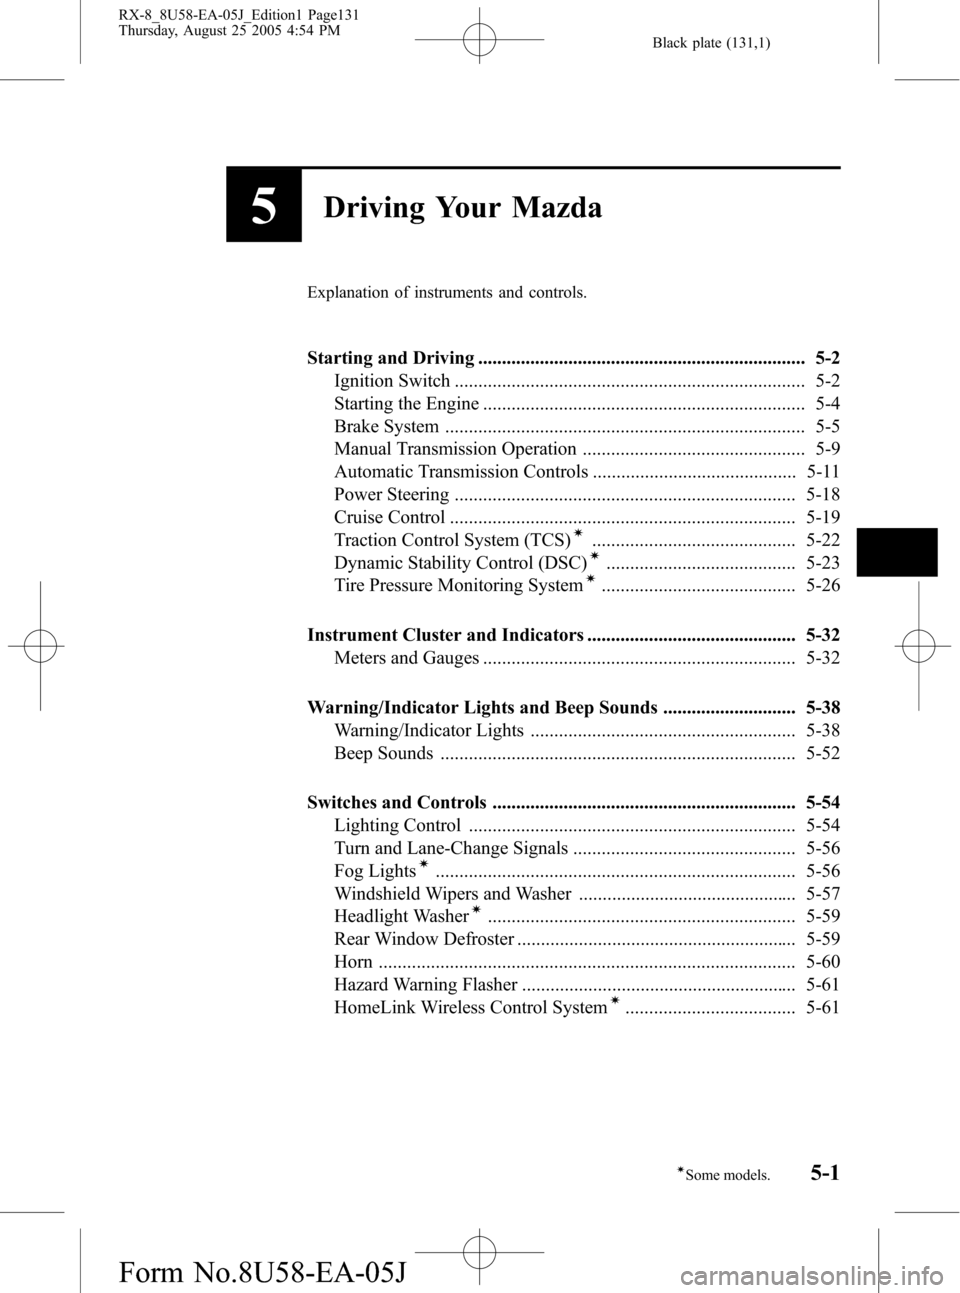 MAZDA MODEL RX 8 2006  Owners Manual (in English) Black plate (131,1)
5Driving Your Mazda
Explanation of instruments and controls.
Starting and Driving ..................................................................... 5-2
Ignition Switch ........